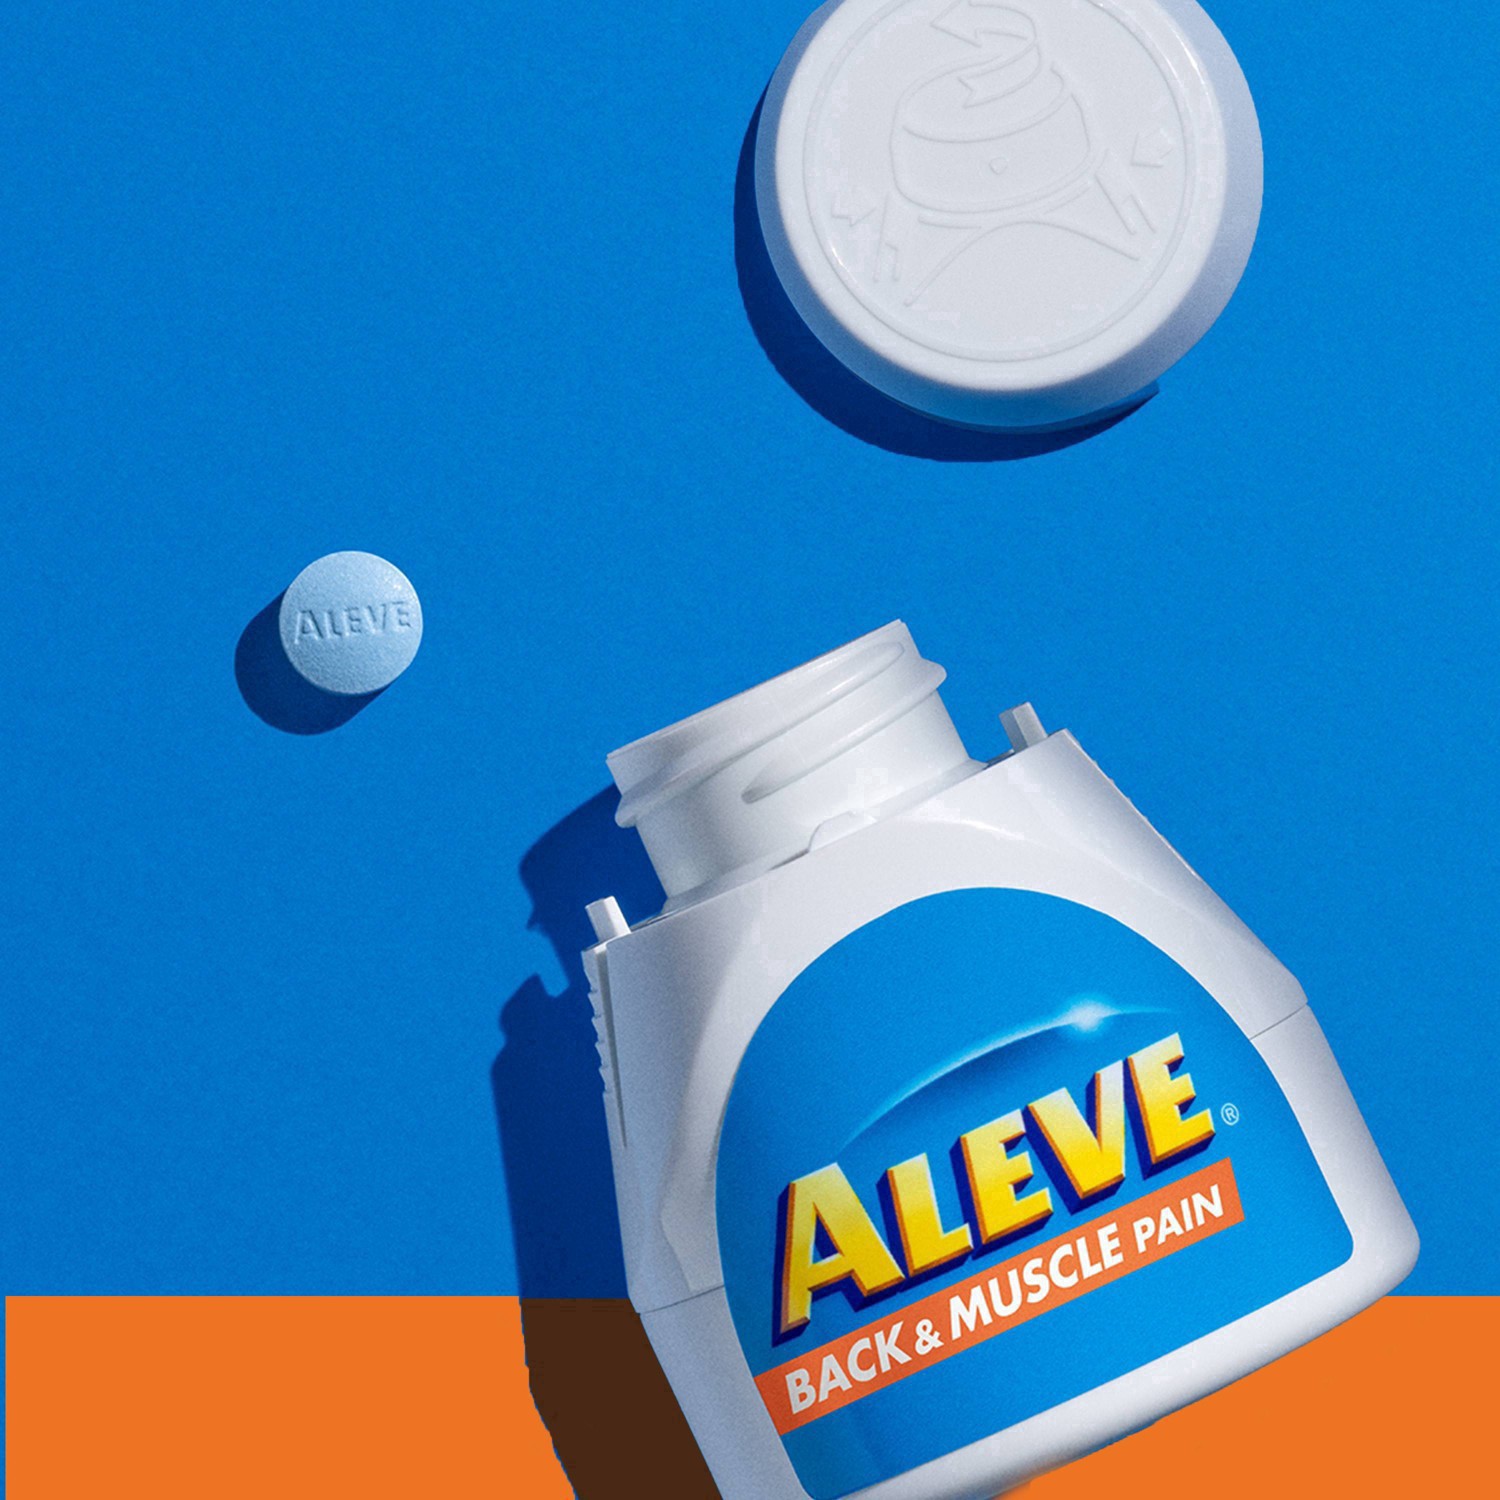 slide 21 of 73, Aleve Back & Muscle Pain Relief Naproxen Sodium Tablets, 50 ct